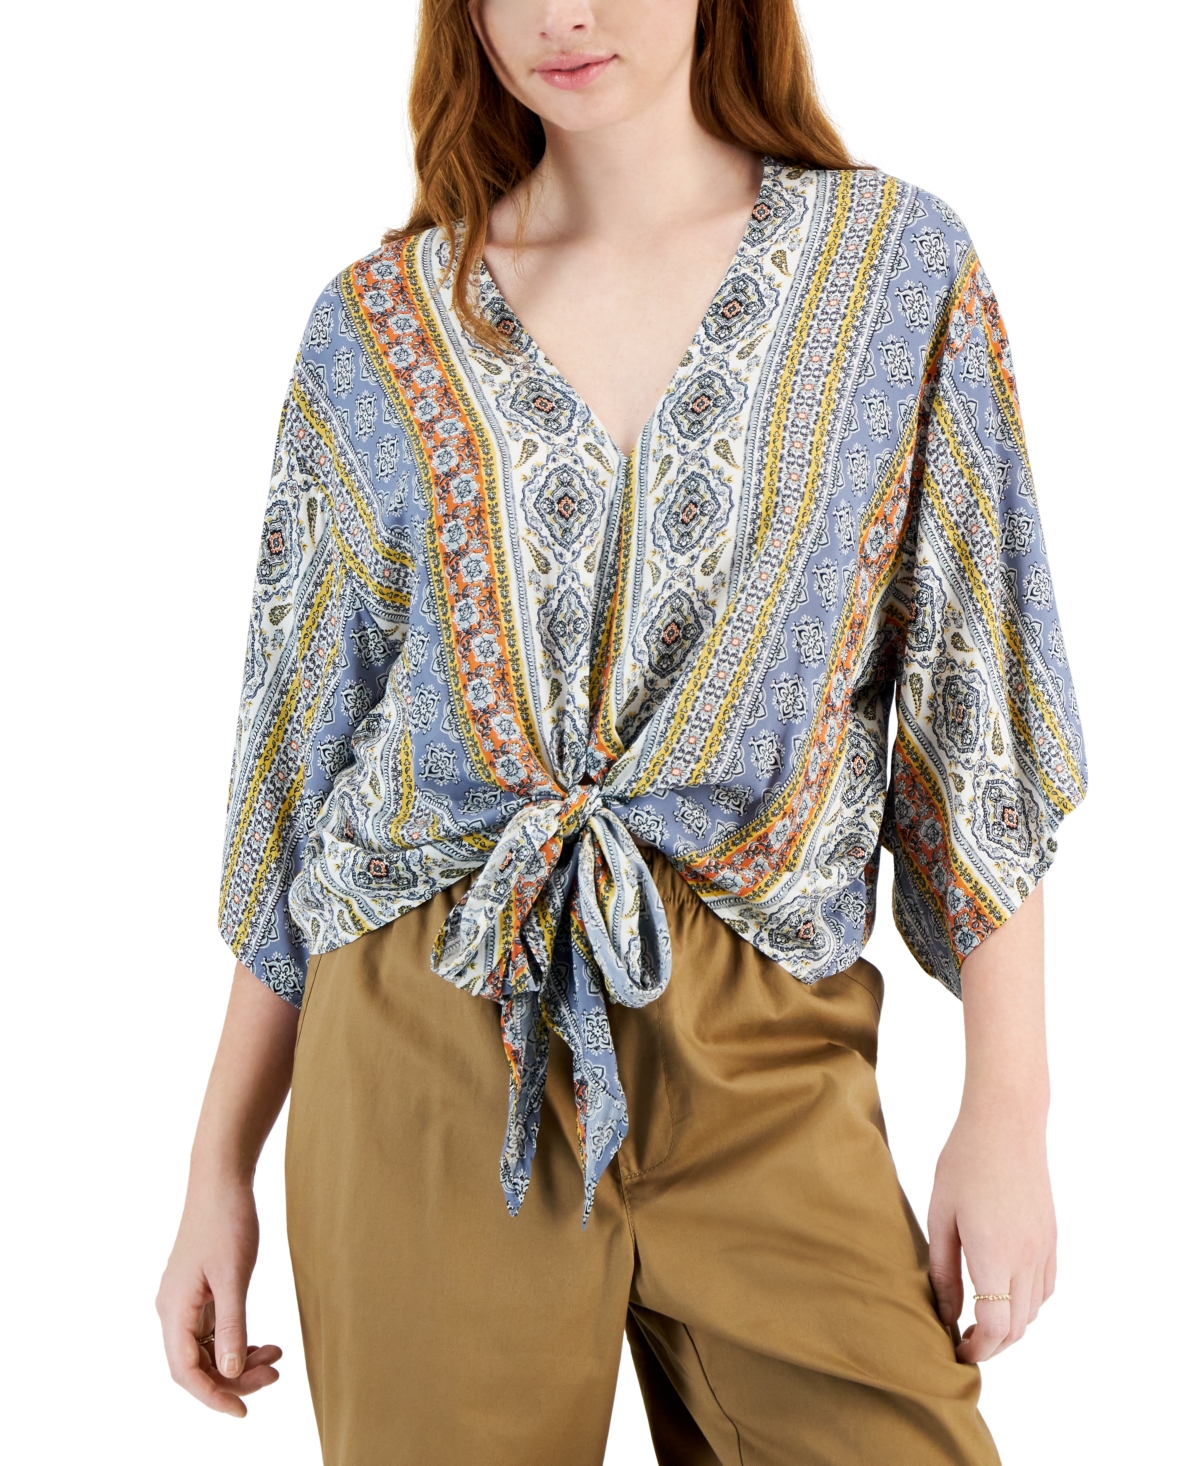 Just Polly Juniors' Printed Tie-front Top In New Blue Boho